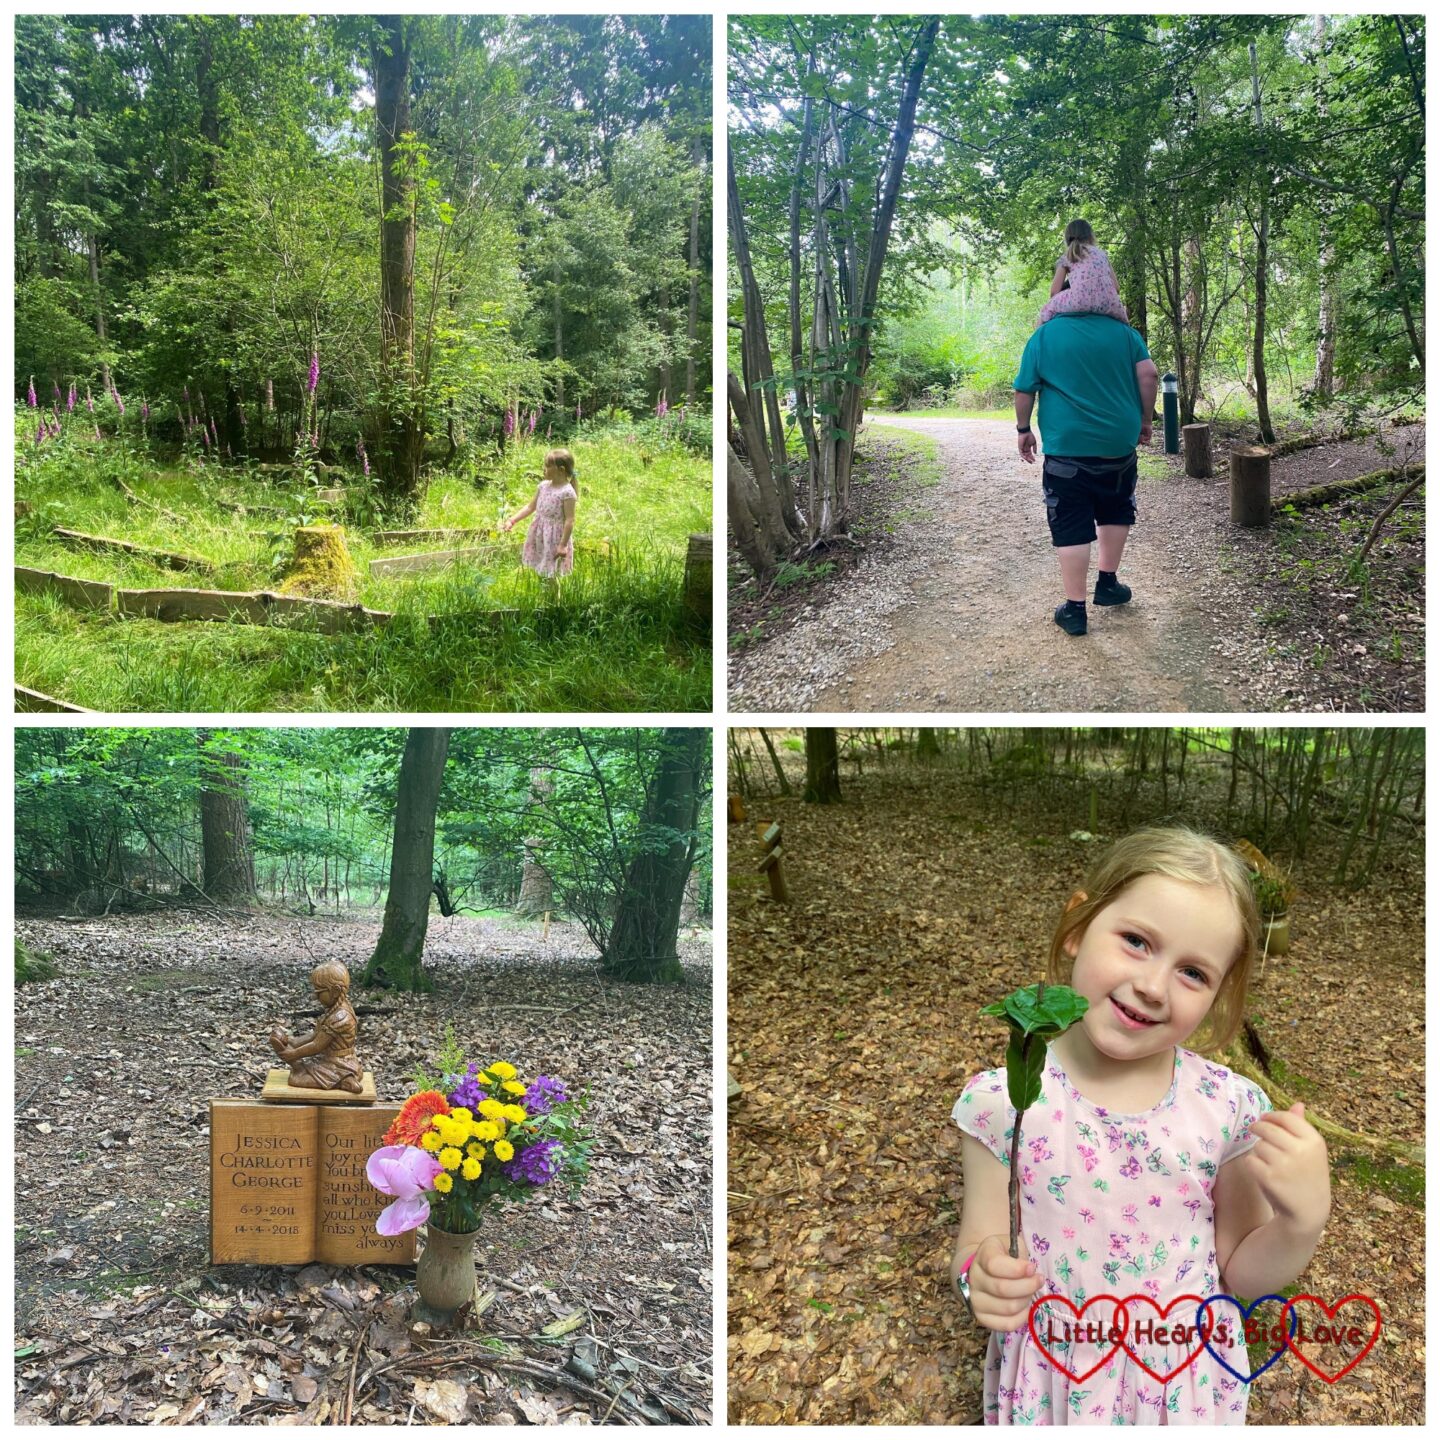 Sophie exploring the labyrinth at GreenAcres; Sophie riding on Daddy's shoulders; Jessica's forever bed with fresh flowers in her vase; Sophie holding up her nature wand